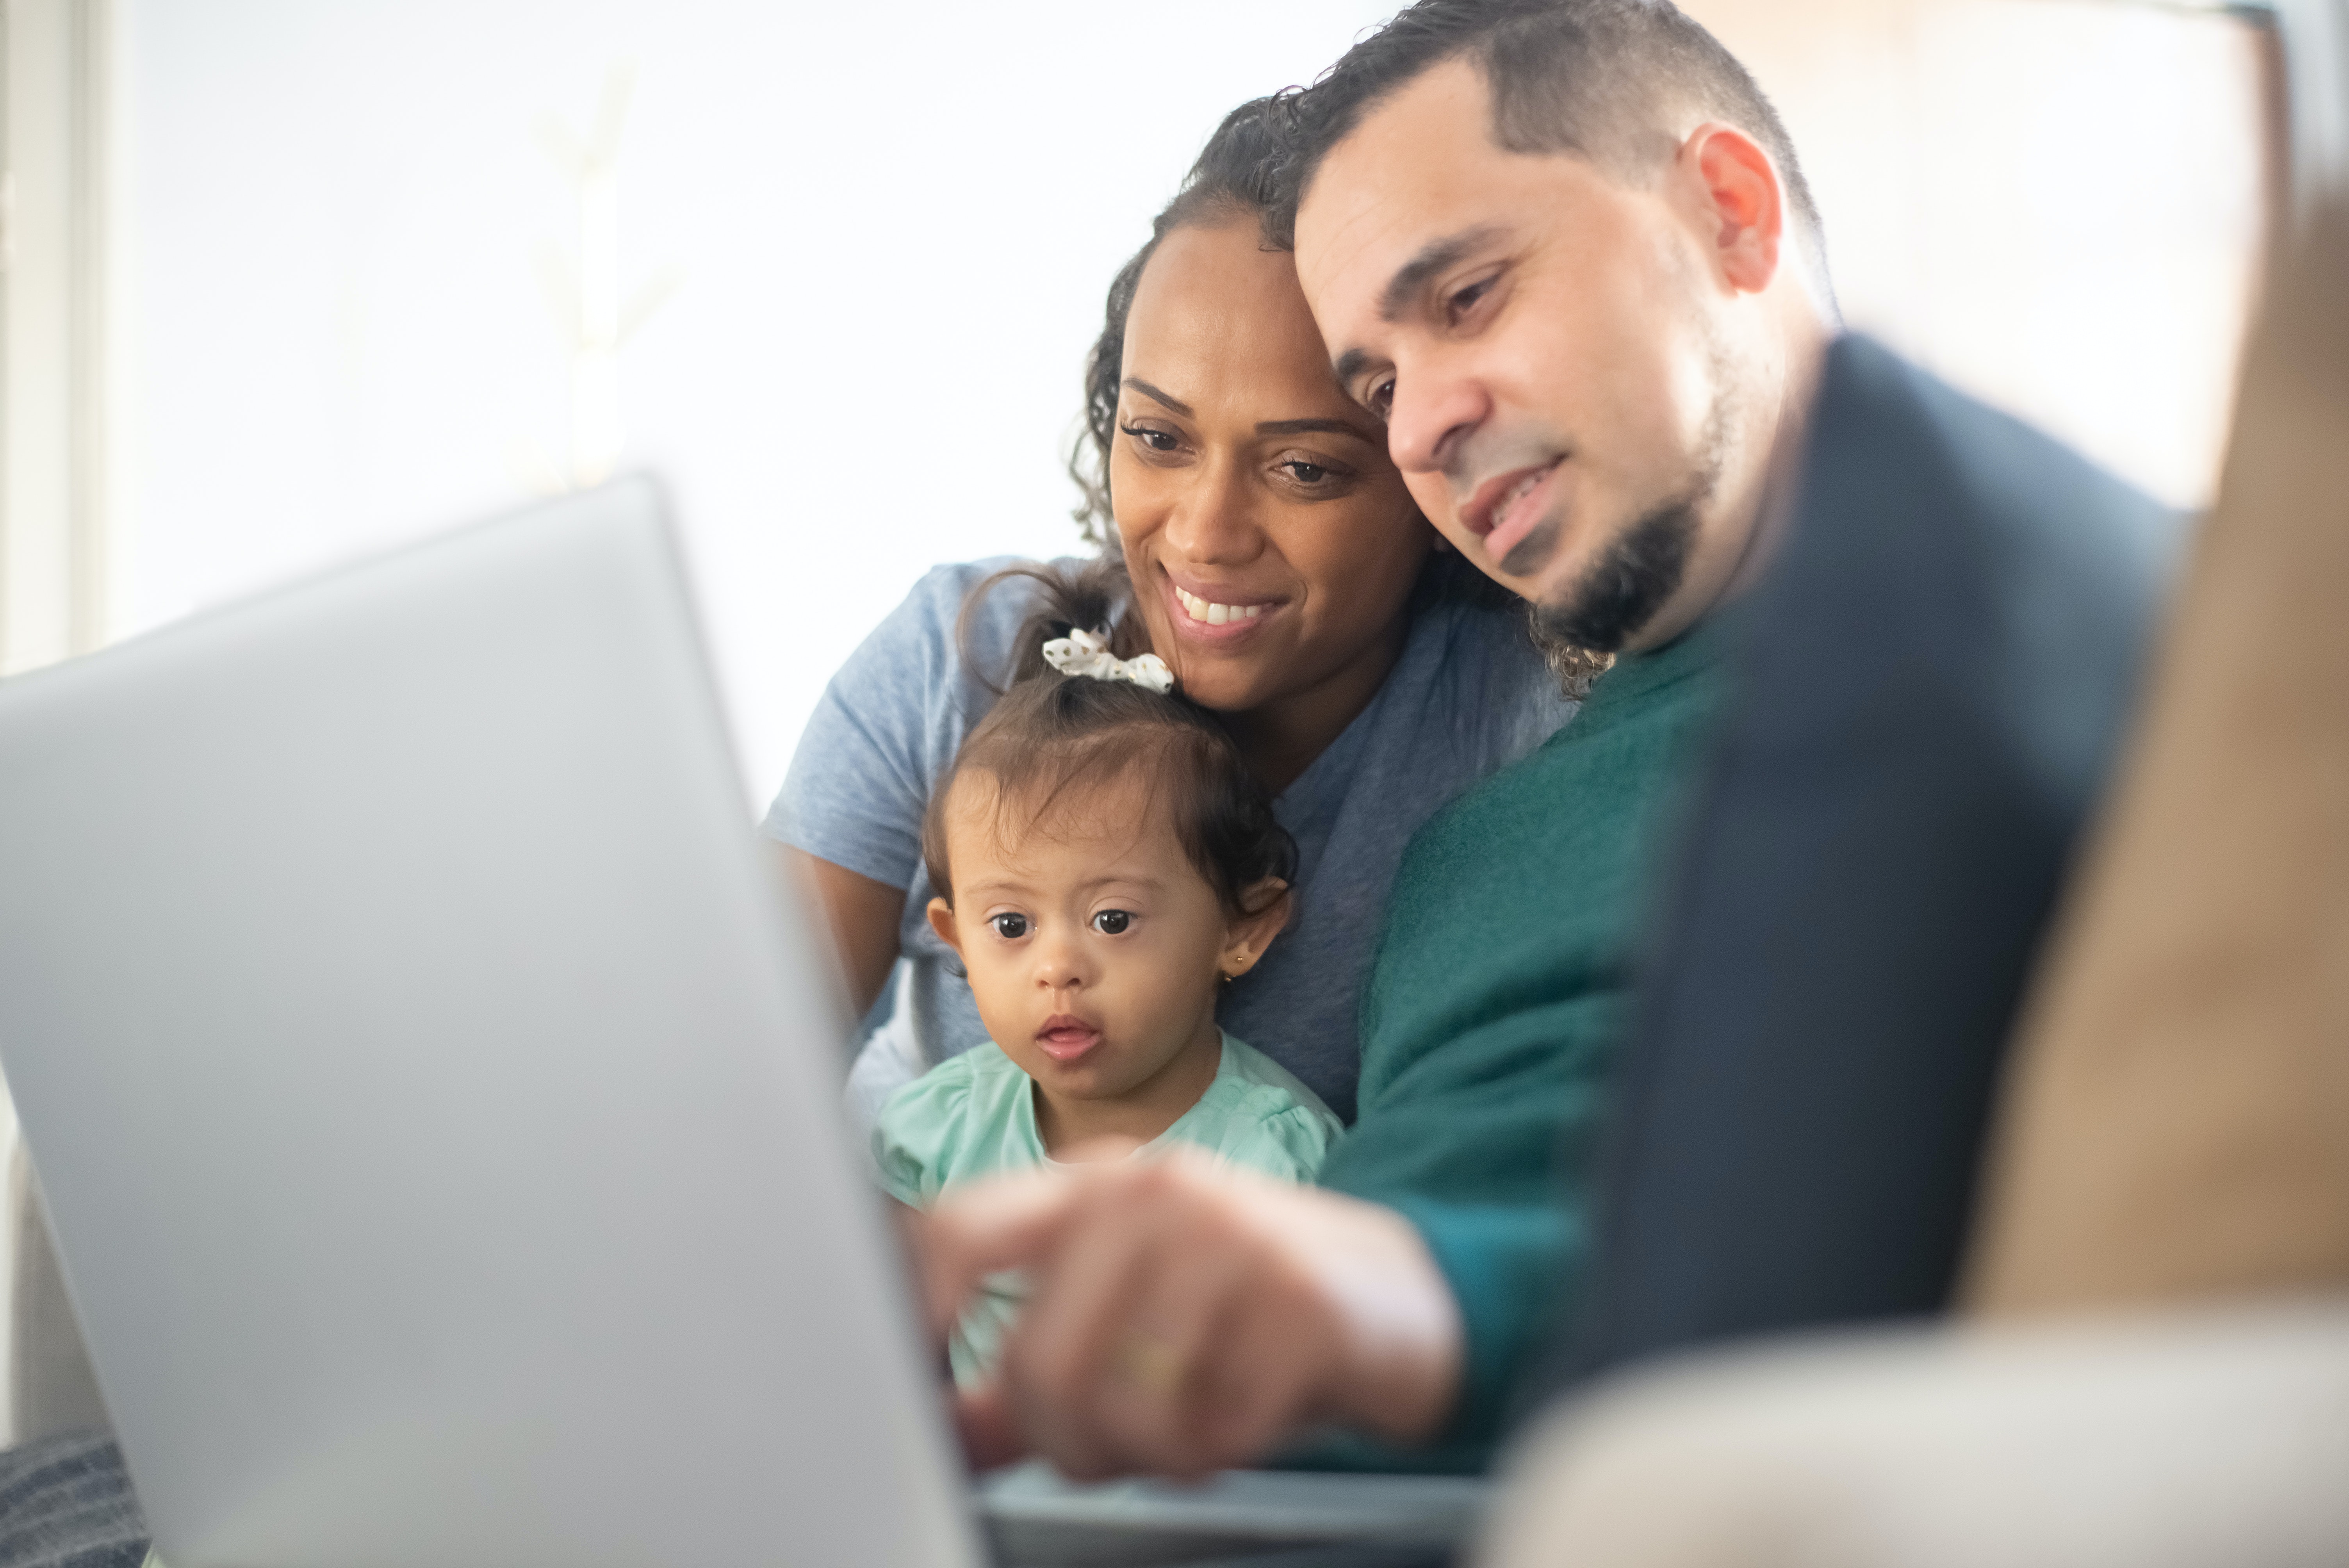 Two parents sit with their baby smiling. One of the parents points to a laptop that sits on their lap.